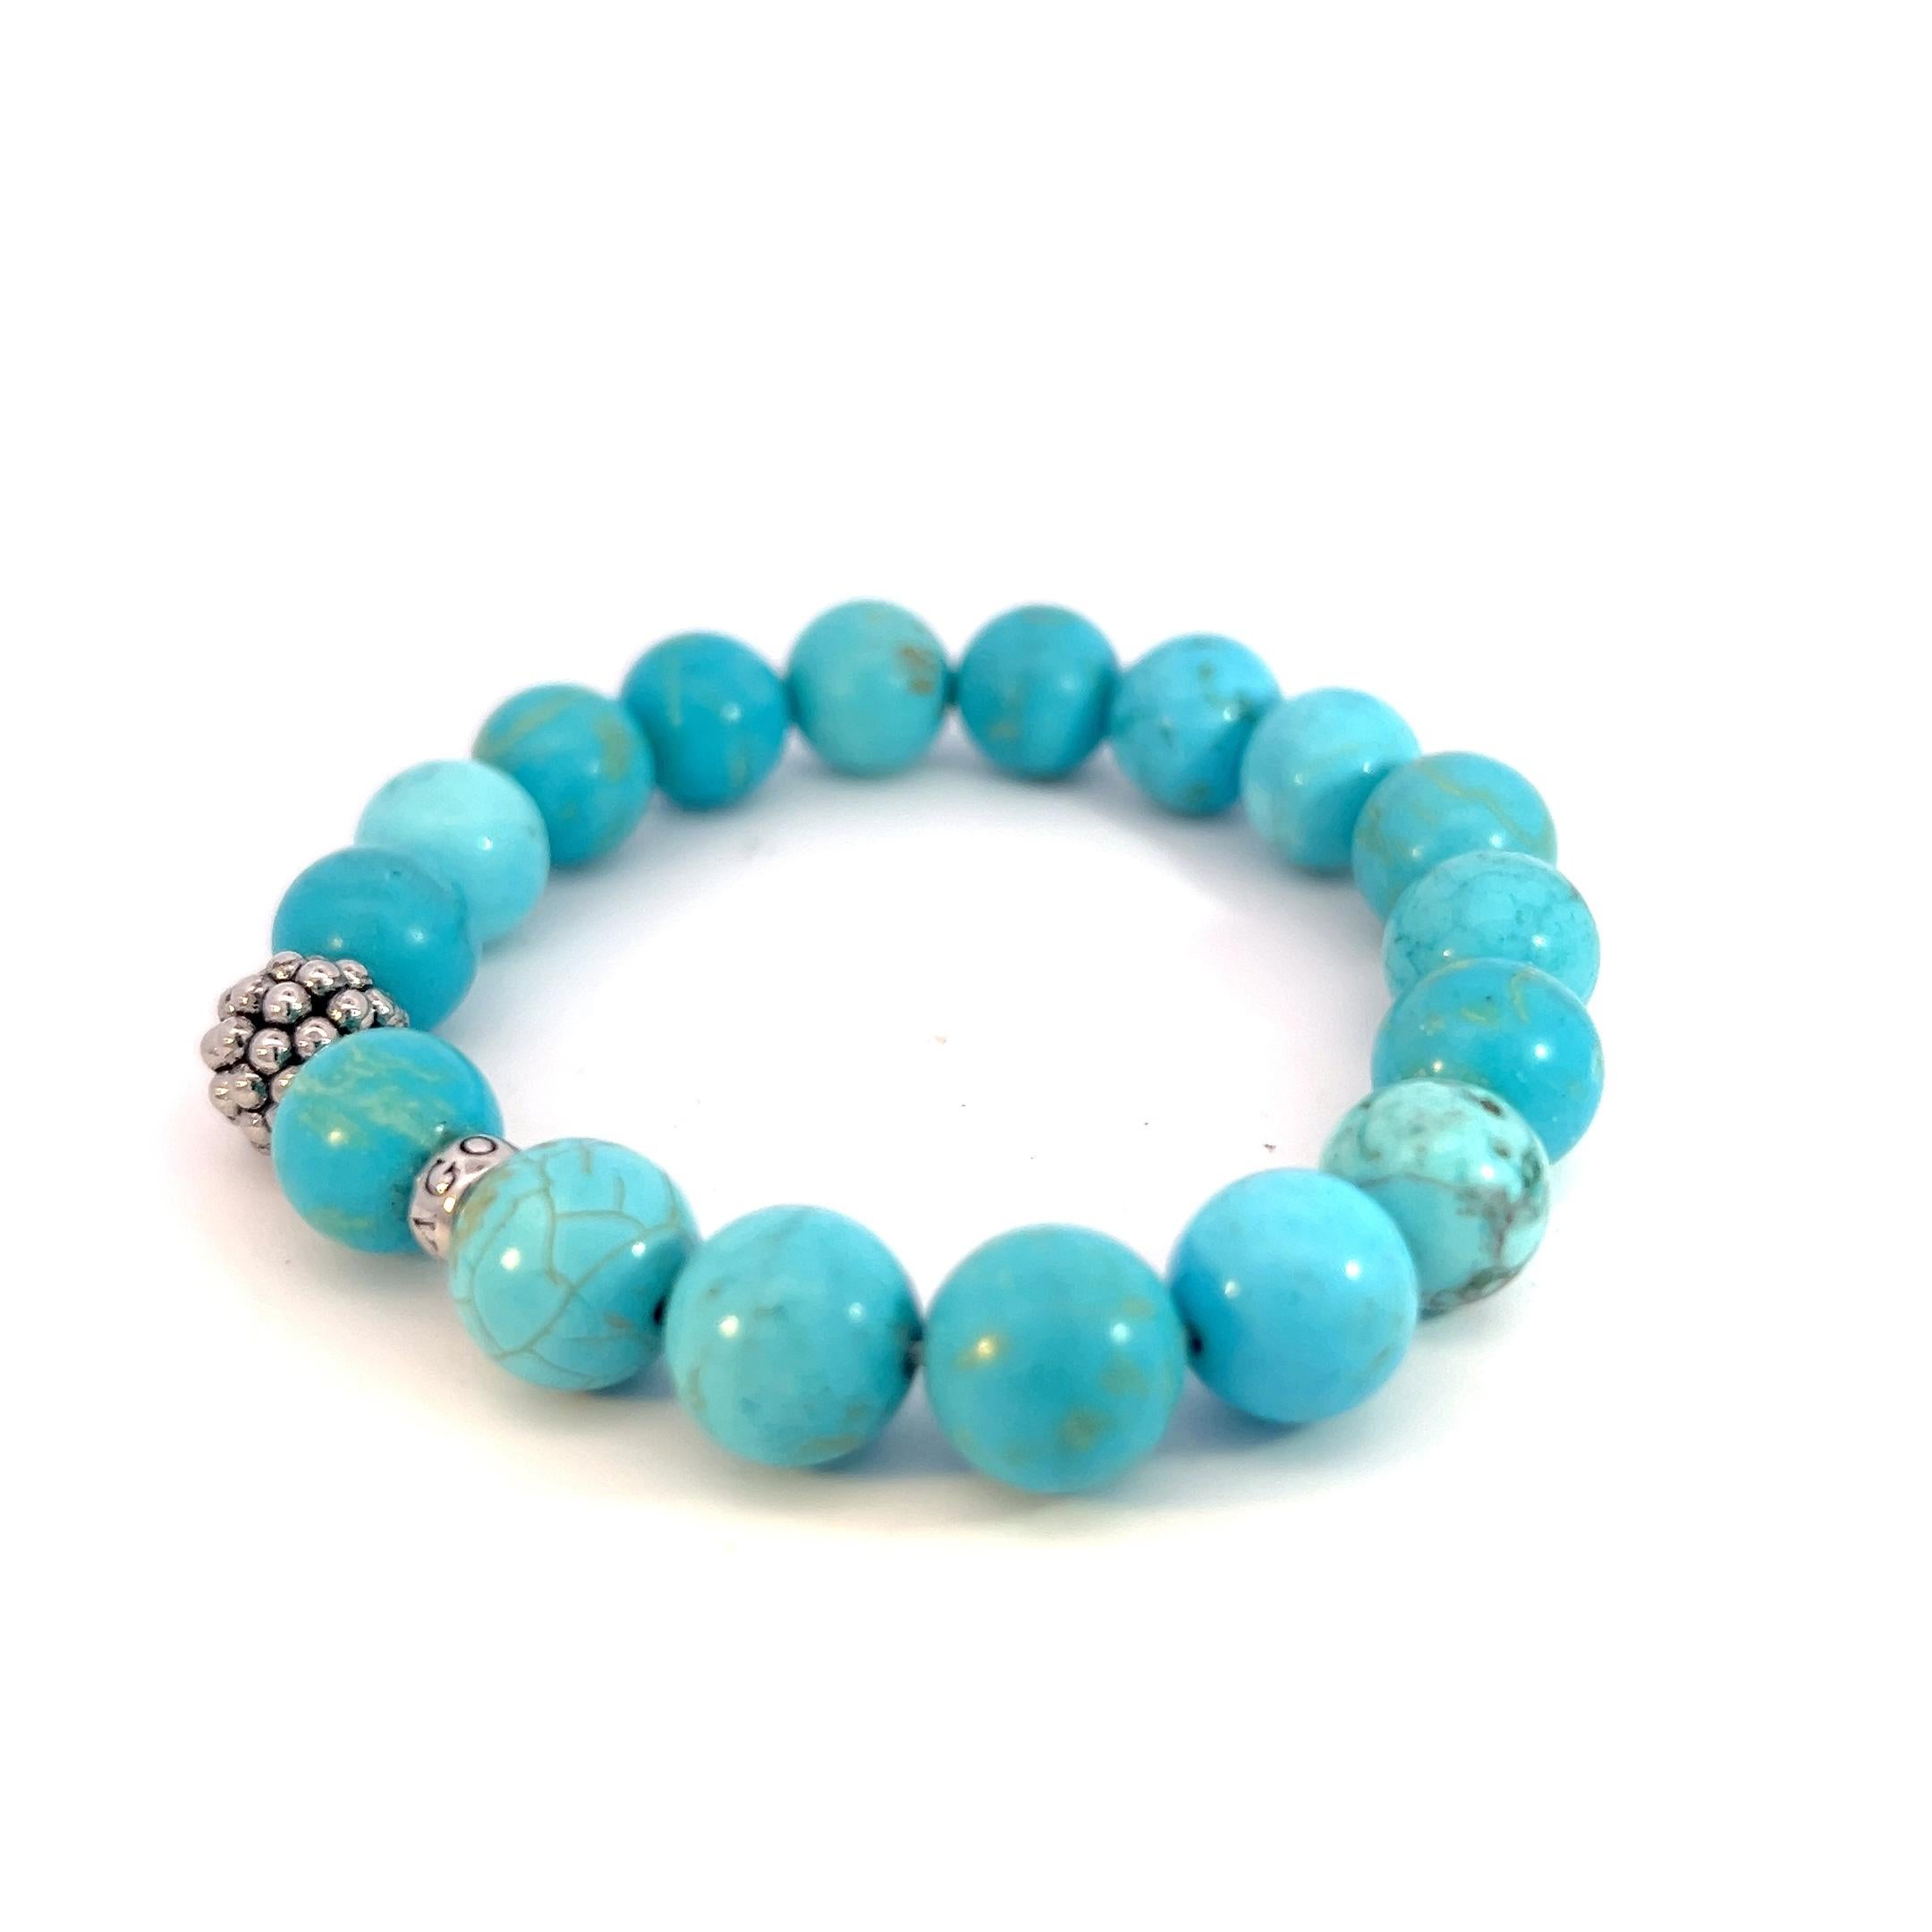 Authentic Lagos Maya Estate Turquoise Bead Bracelet Sterling Silver 10 mm L1




This elegant Authentic Lagos bracelet is made of Turquoise beads and sterling silver.


TRUSTED SELLER SINCE 2002


PLEASE SEE OUR HUNDREDS OF POSITIVE FEEDBACKS FROM